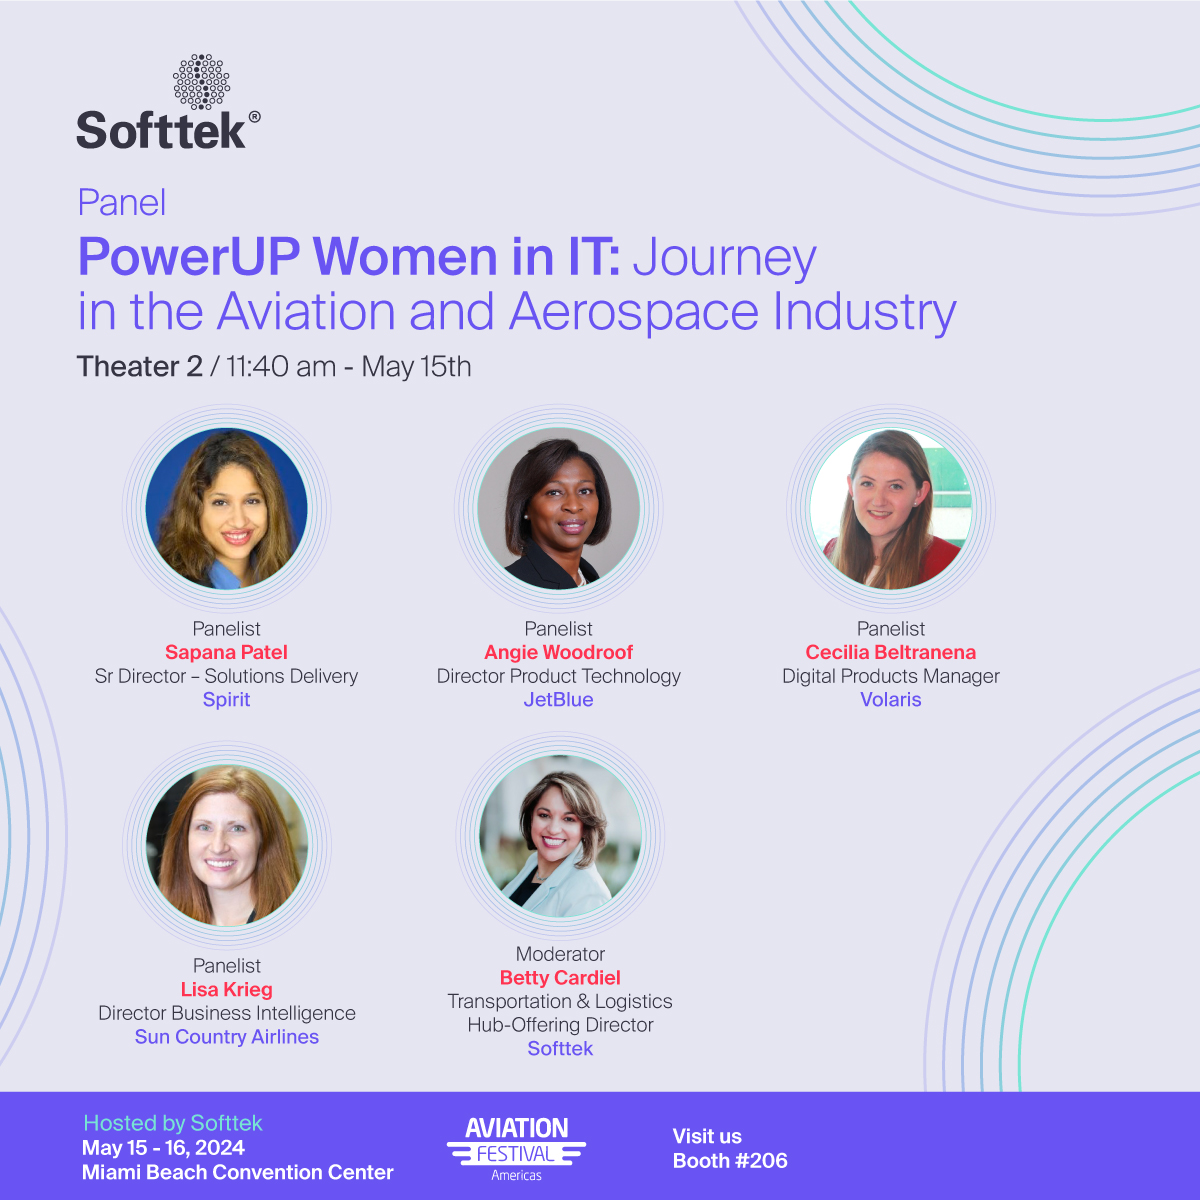 Attention all #aviation enthusiasts! ✈️ Join us this Wednesday at Aviation Festival Americas 2024 for the PowerUP Women IT Journey panel. Get more info 👉 bit.ly/3Wvs9mv #WomeninAviation #AviationTech